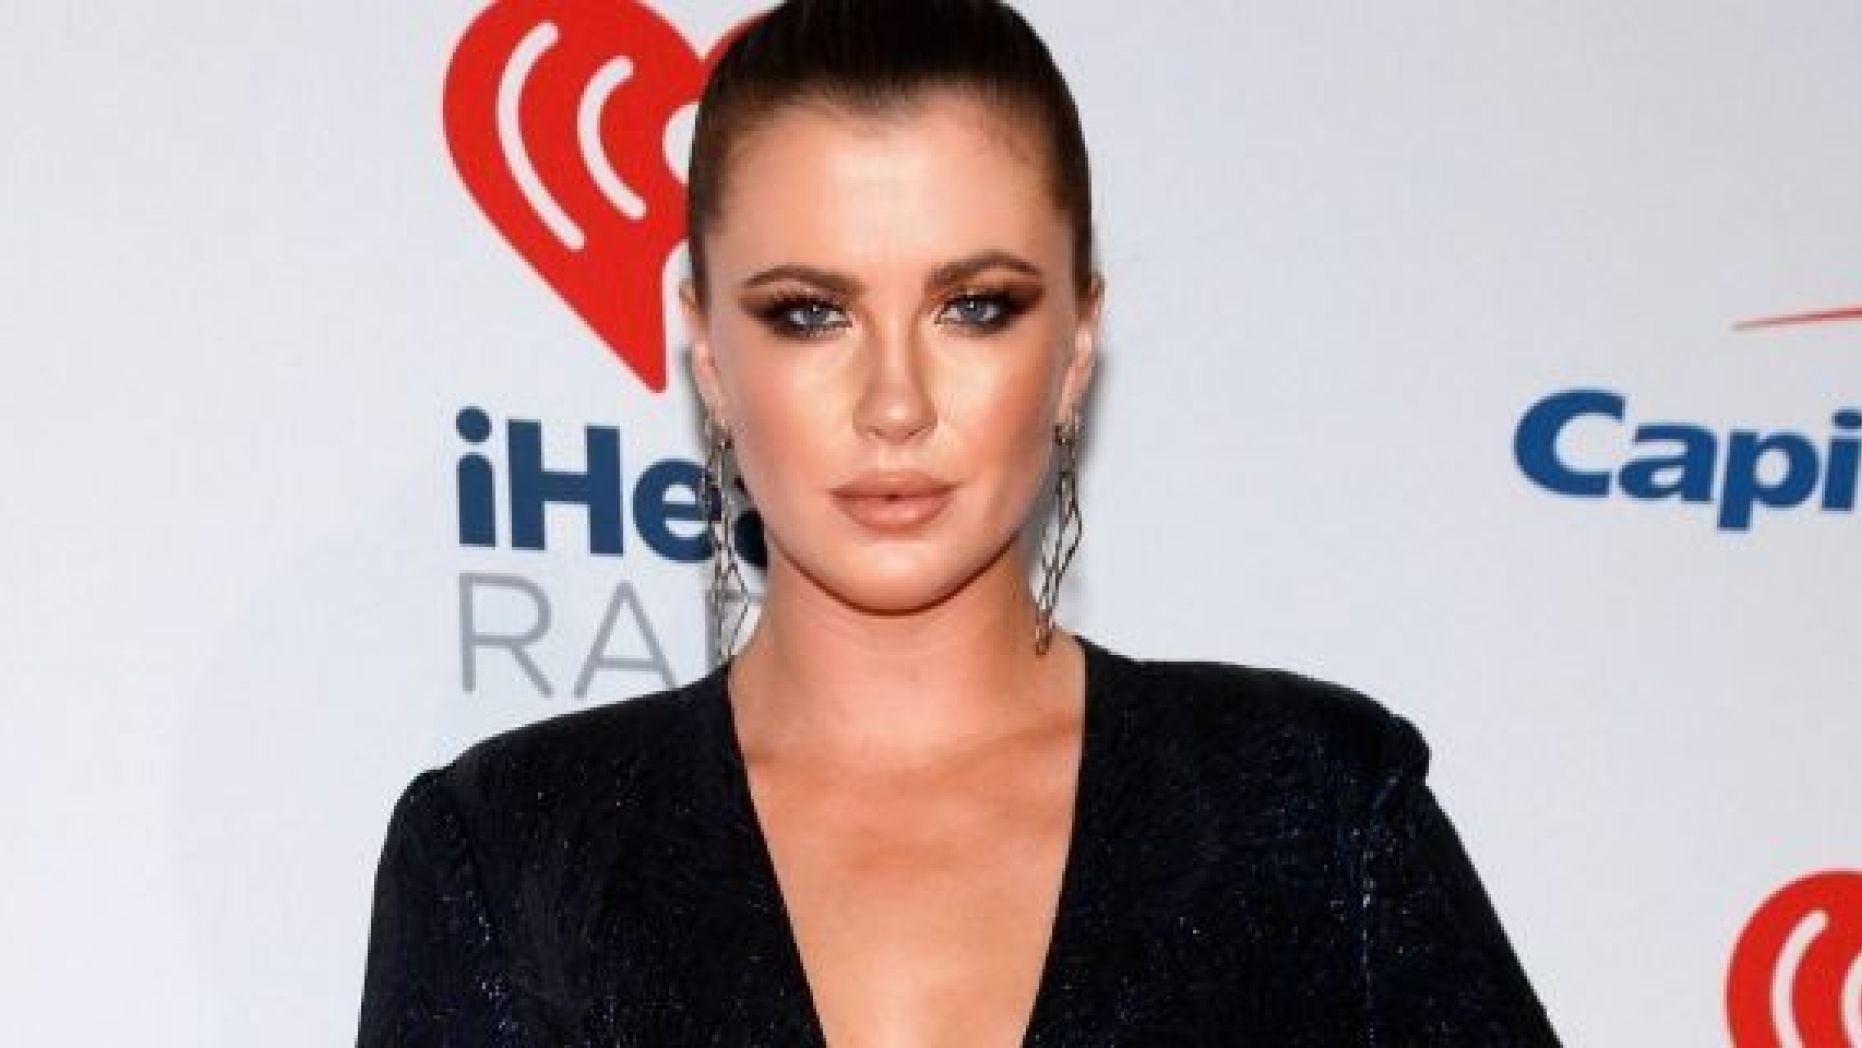 Ireland Baldwin said a police officer accused her of being a looter after she tried to get into Malibu, Calif.